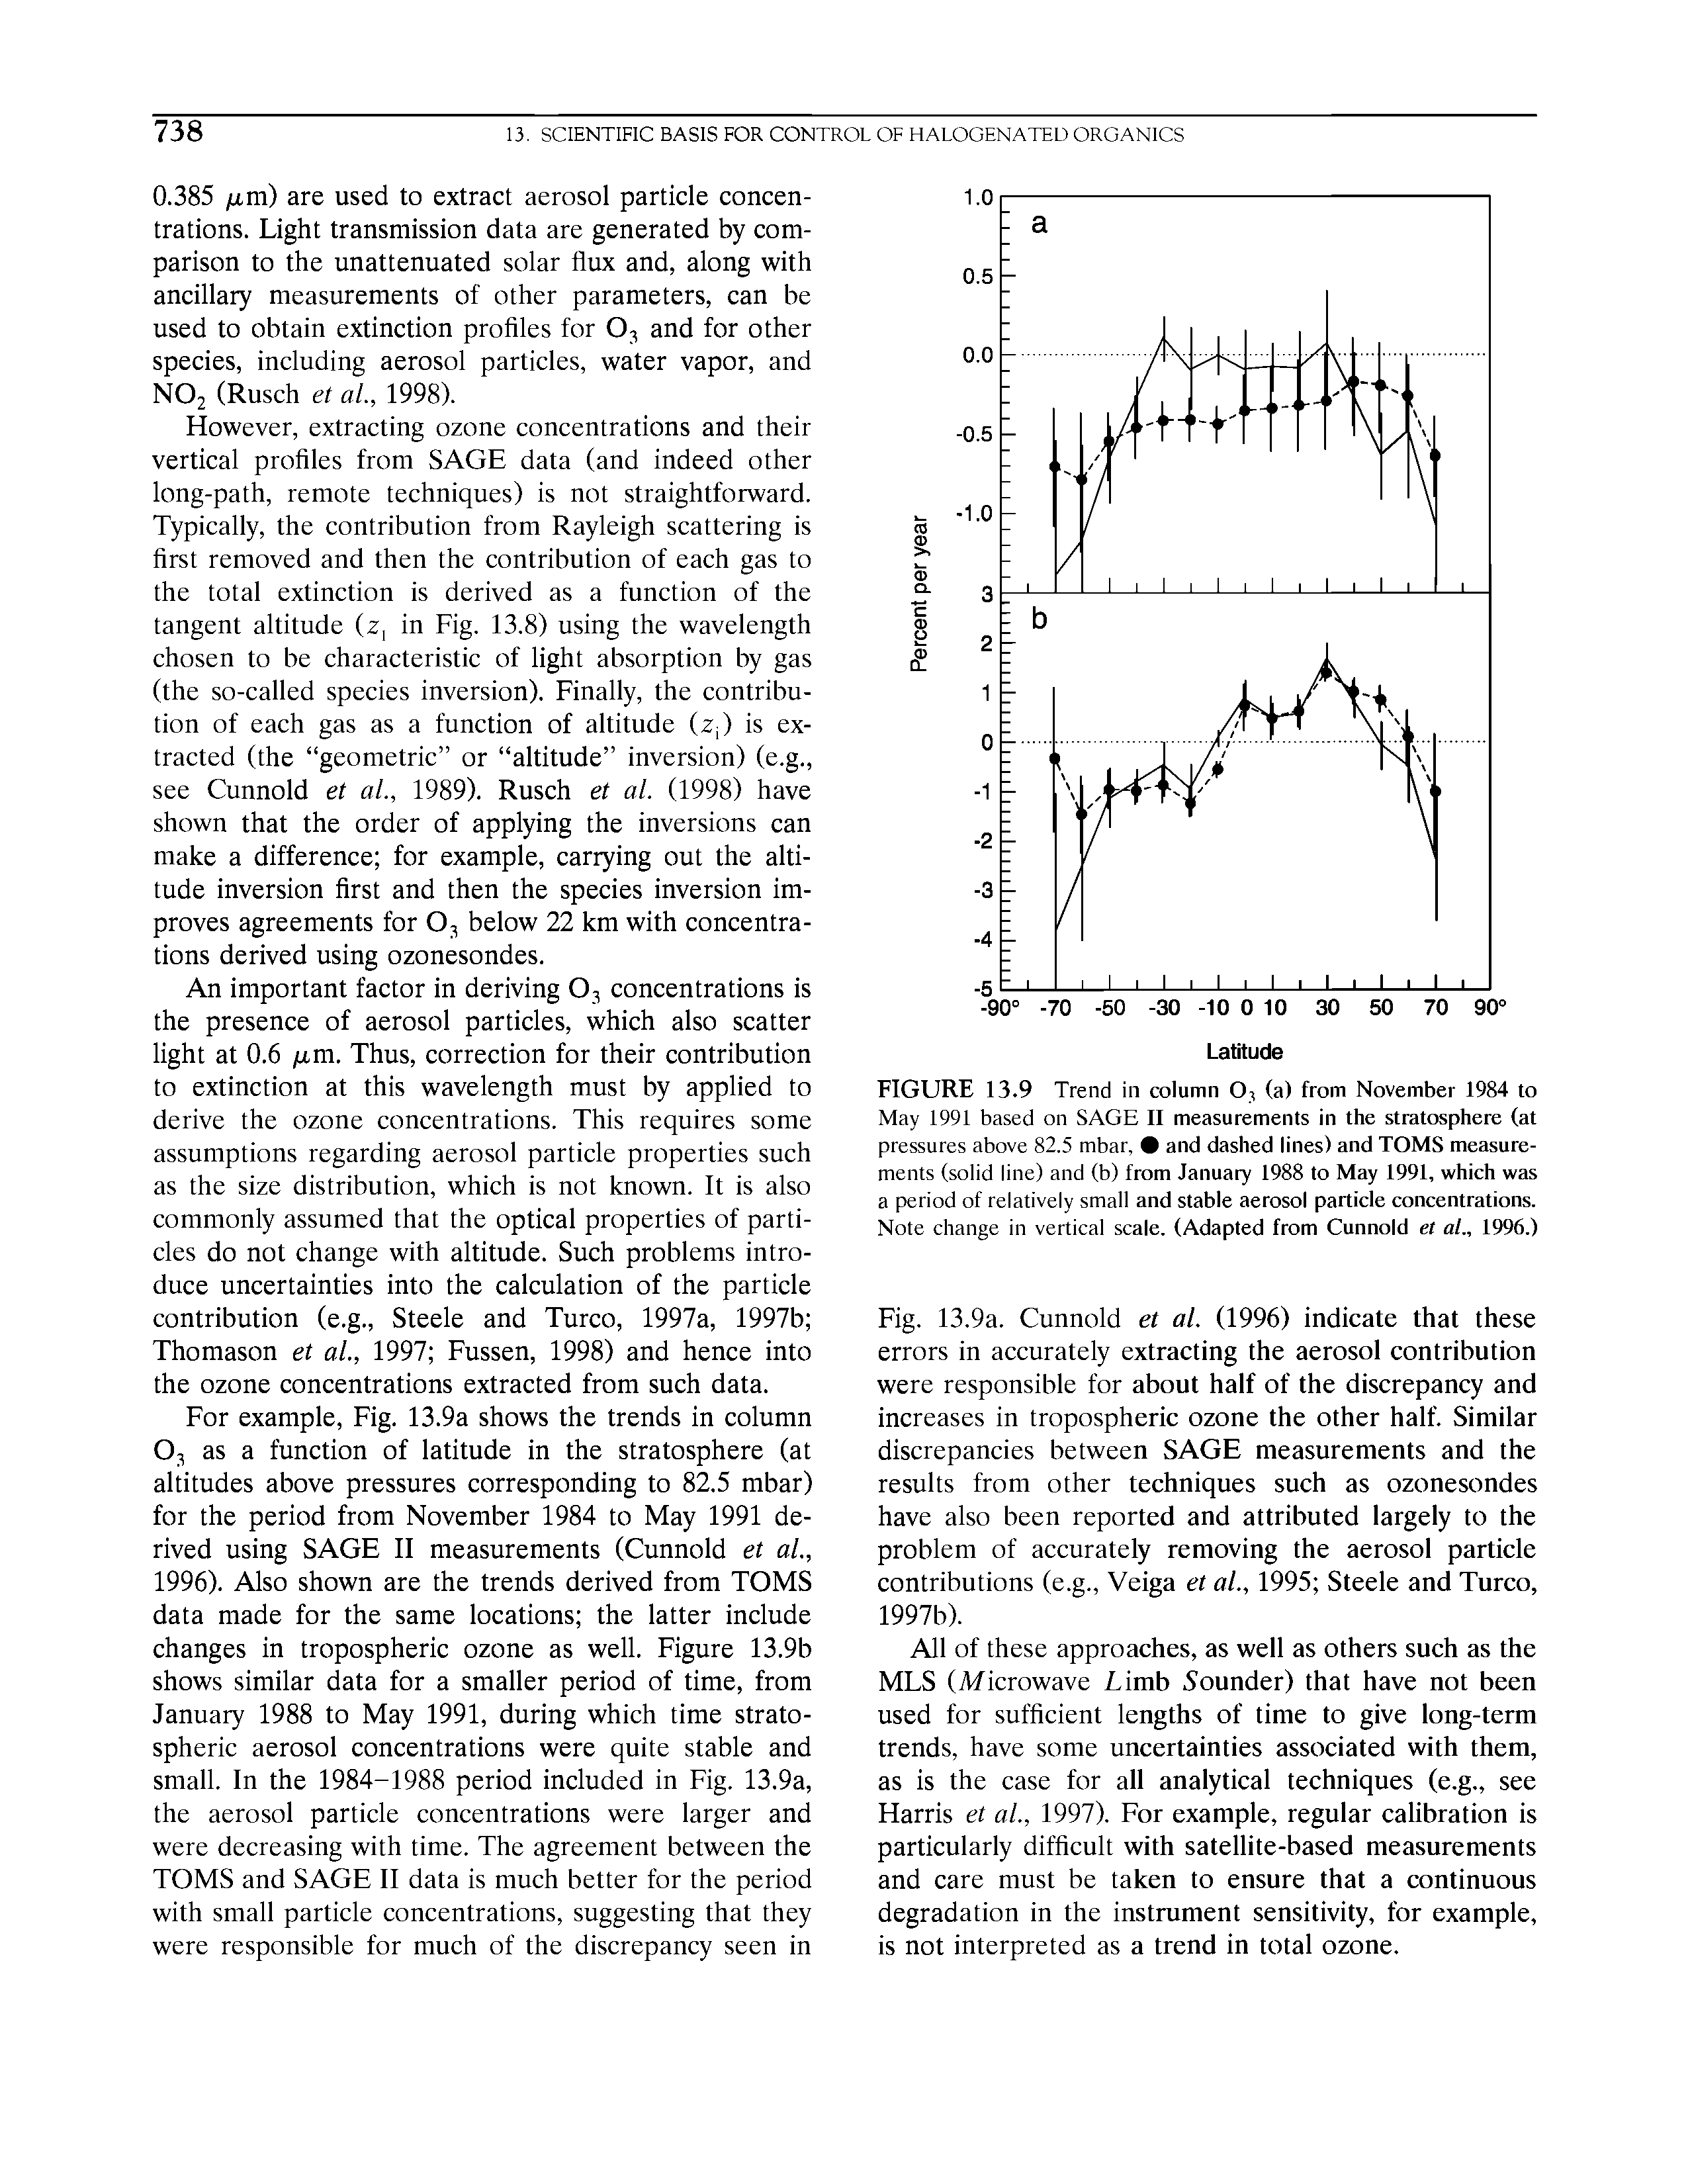 Fig. 13.9a. Cunnold et al. (1996) indicate that these errors in accurately extracting the aerosol contribution were responsible for about half of the discrepancy and increases in tropospheric ozone the other half. Similar discrepancies between SAGE measurements and the results from other techniques such as ozonesondes have also been reported and attributed largely to the problem of accurately removing the aerosol particle contributions (e.g., Veiga et al., 1995 Steele and Turco, 1997b).